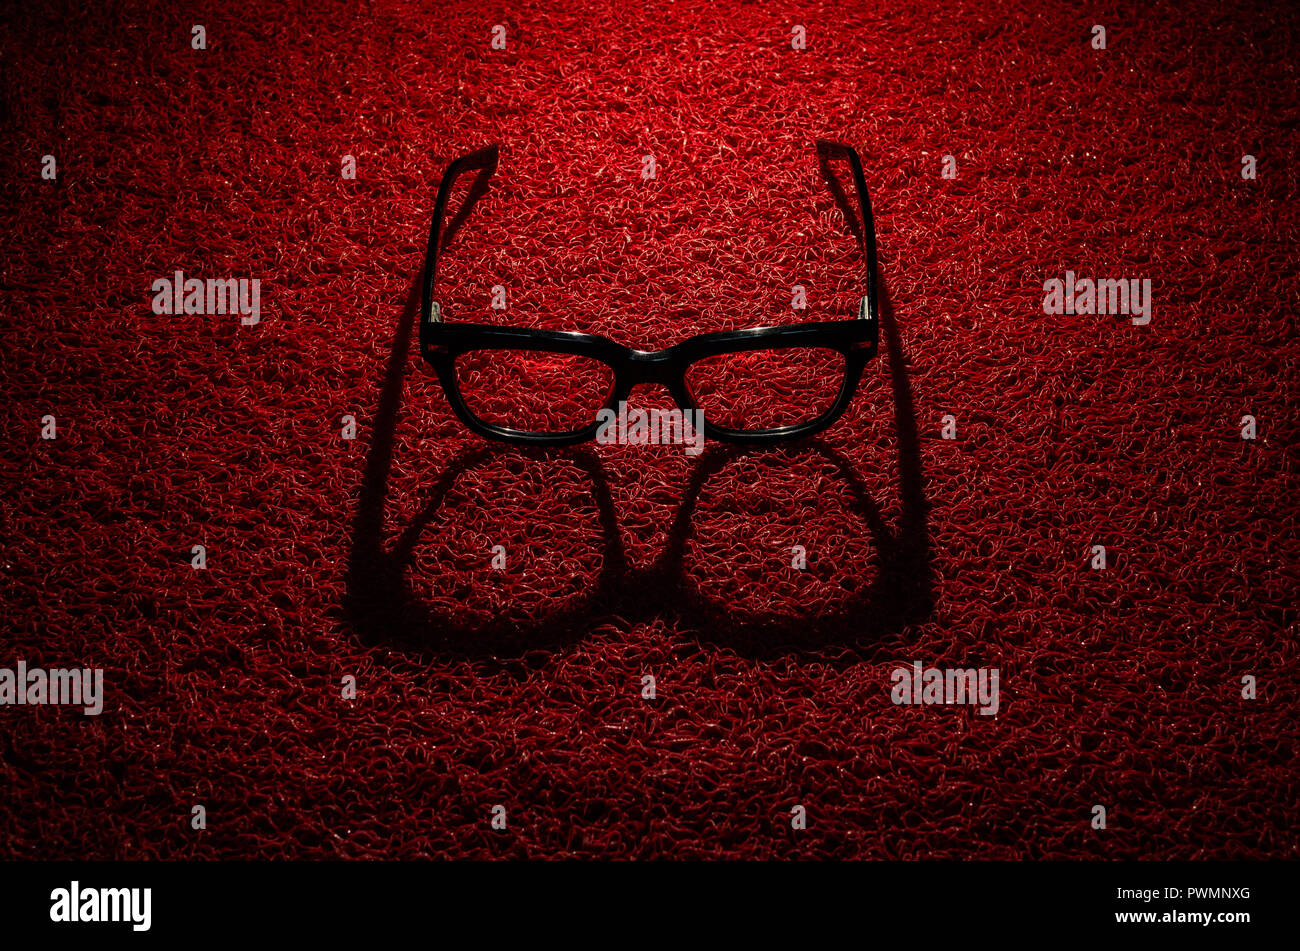 Studio shot of a black, full rim, rectangular, spectacle frame with direction lighting producing a hard front shadow on red textured background. Stock Photo